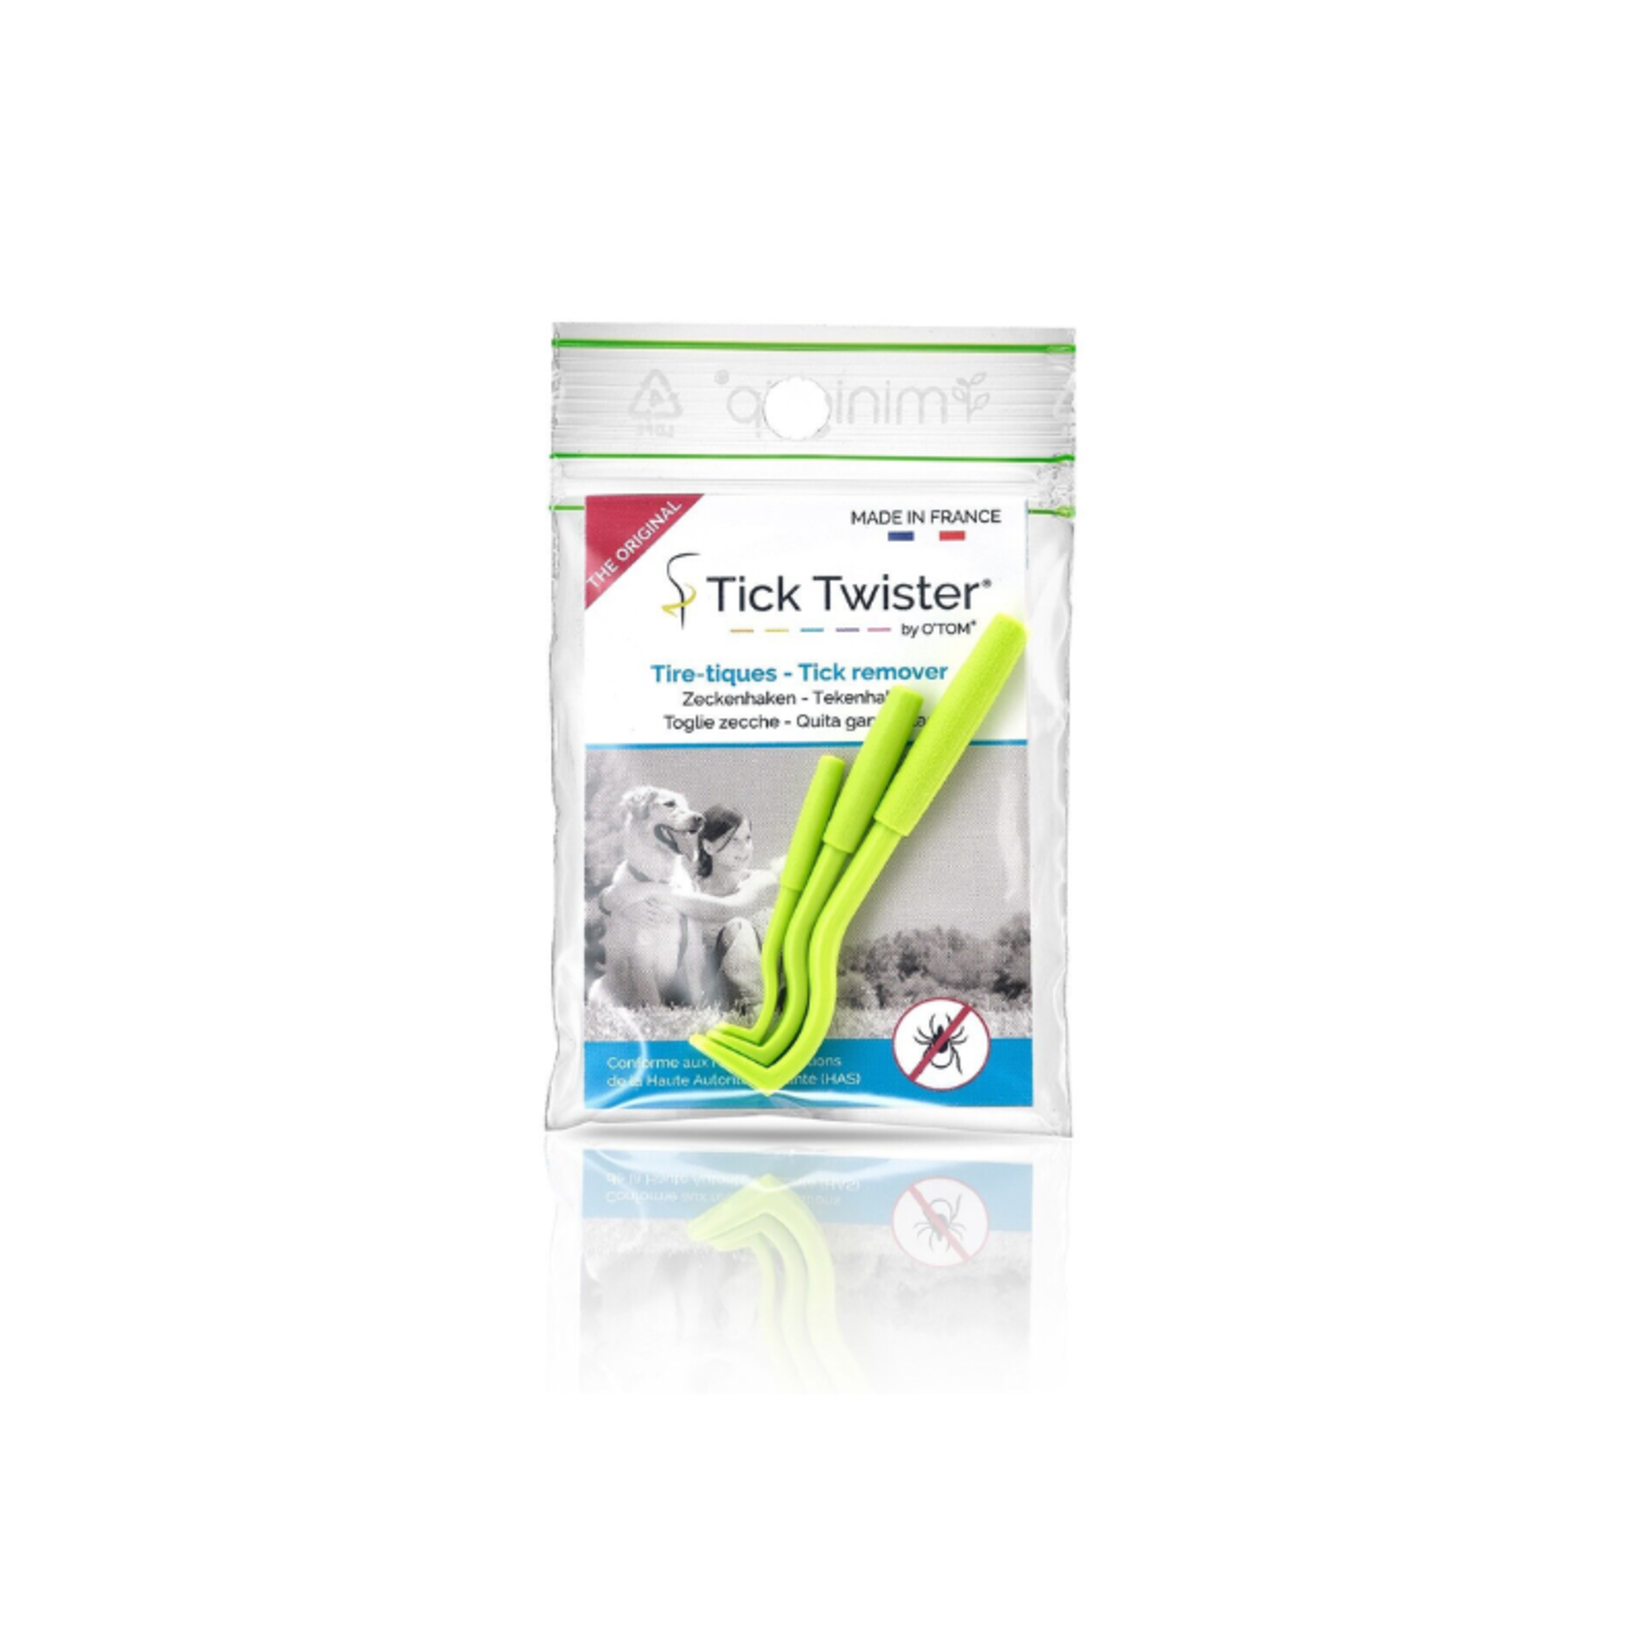 3-pk. - Tick Twister ® by O'Tom - Bagged (no case)